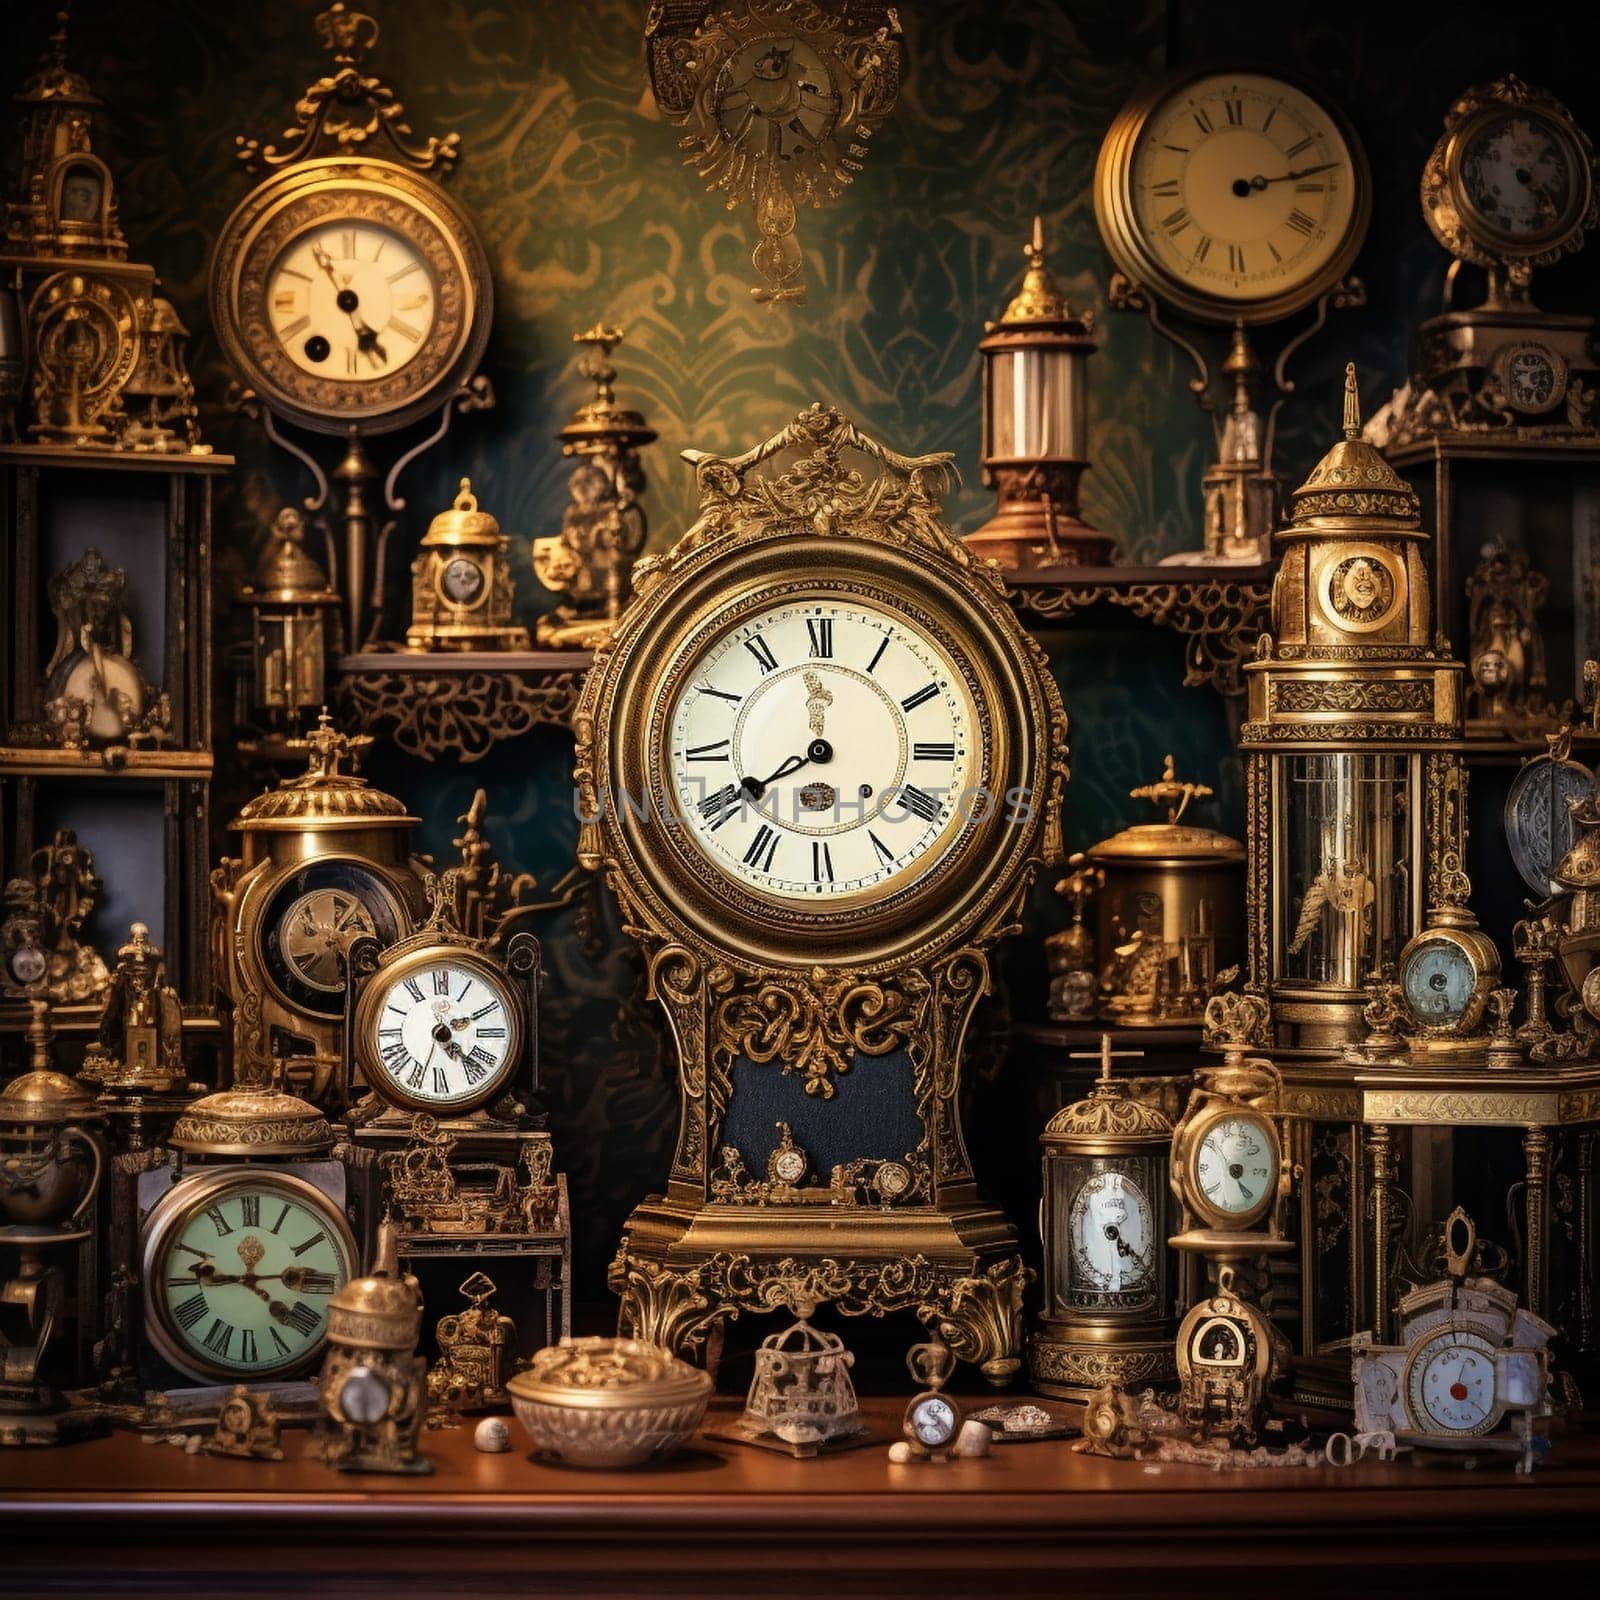 Step into a mesmerizing world of vintage clocks with this enchanting image titled 'Timeless Treasures: Showcasing Vintage Clocks' Artistry'. This captivating scene features an ornate display of intricately designed clocks, spanning different eras and styles. From delicate filigree work to mesmerizing pendulums, each clock exudes its unique charm and character. The warm and nostalgic color palette, coupled with the inviting lighting scheme, evokes a sense of timeless beauty. Immerse yourself in the artistry of antique timekeepers and indulge in a celebration of craftsmanship from a bygone era filled with history and sophistication.